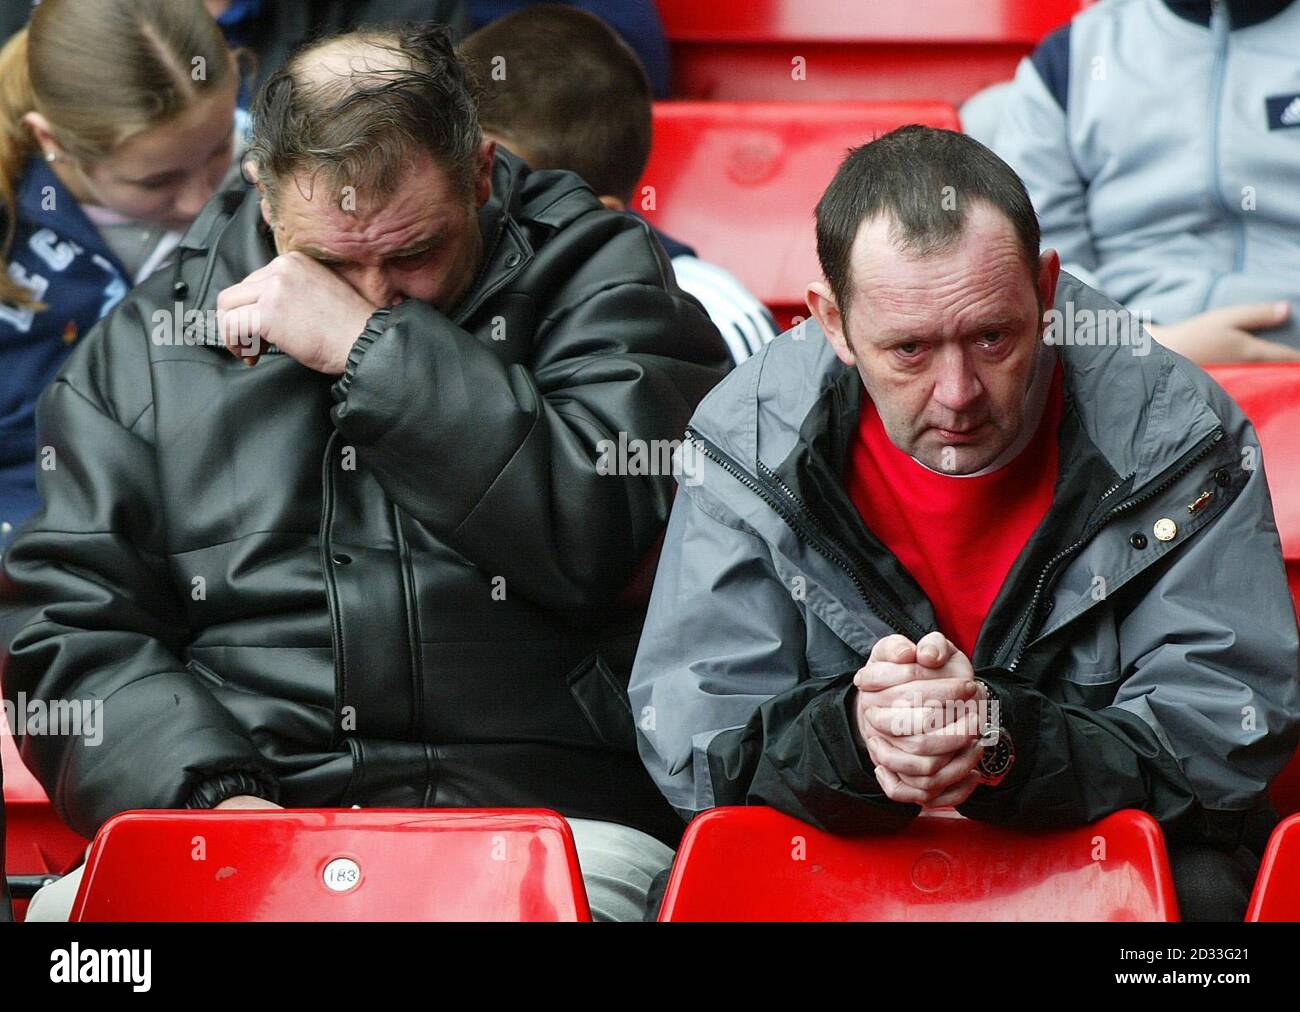 Football fans clearly emotional during a memorial service held at the Kop stand of Liverpool Football Club's Anfield stadium,  on the 15th anniversary of the Hillsborough disaster.  A candle was lit for each of the 96 victims who were crushed to death on the Leppings Lane terrace of Sheffield Wednesday's Hillsborough ground during Liverpool's 1989 FA Cup semi-final clash.  Stock Photo